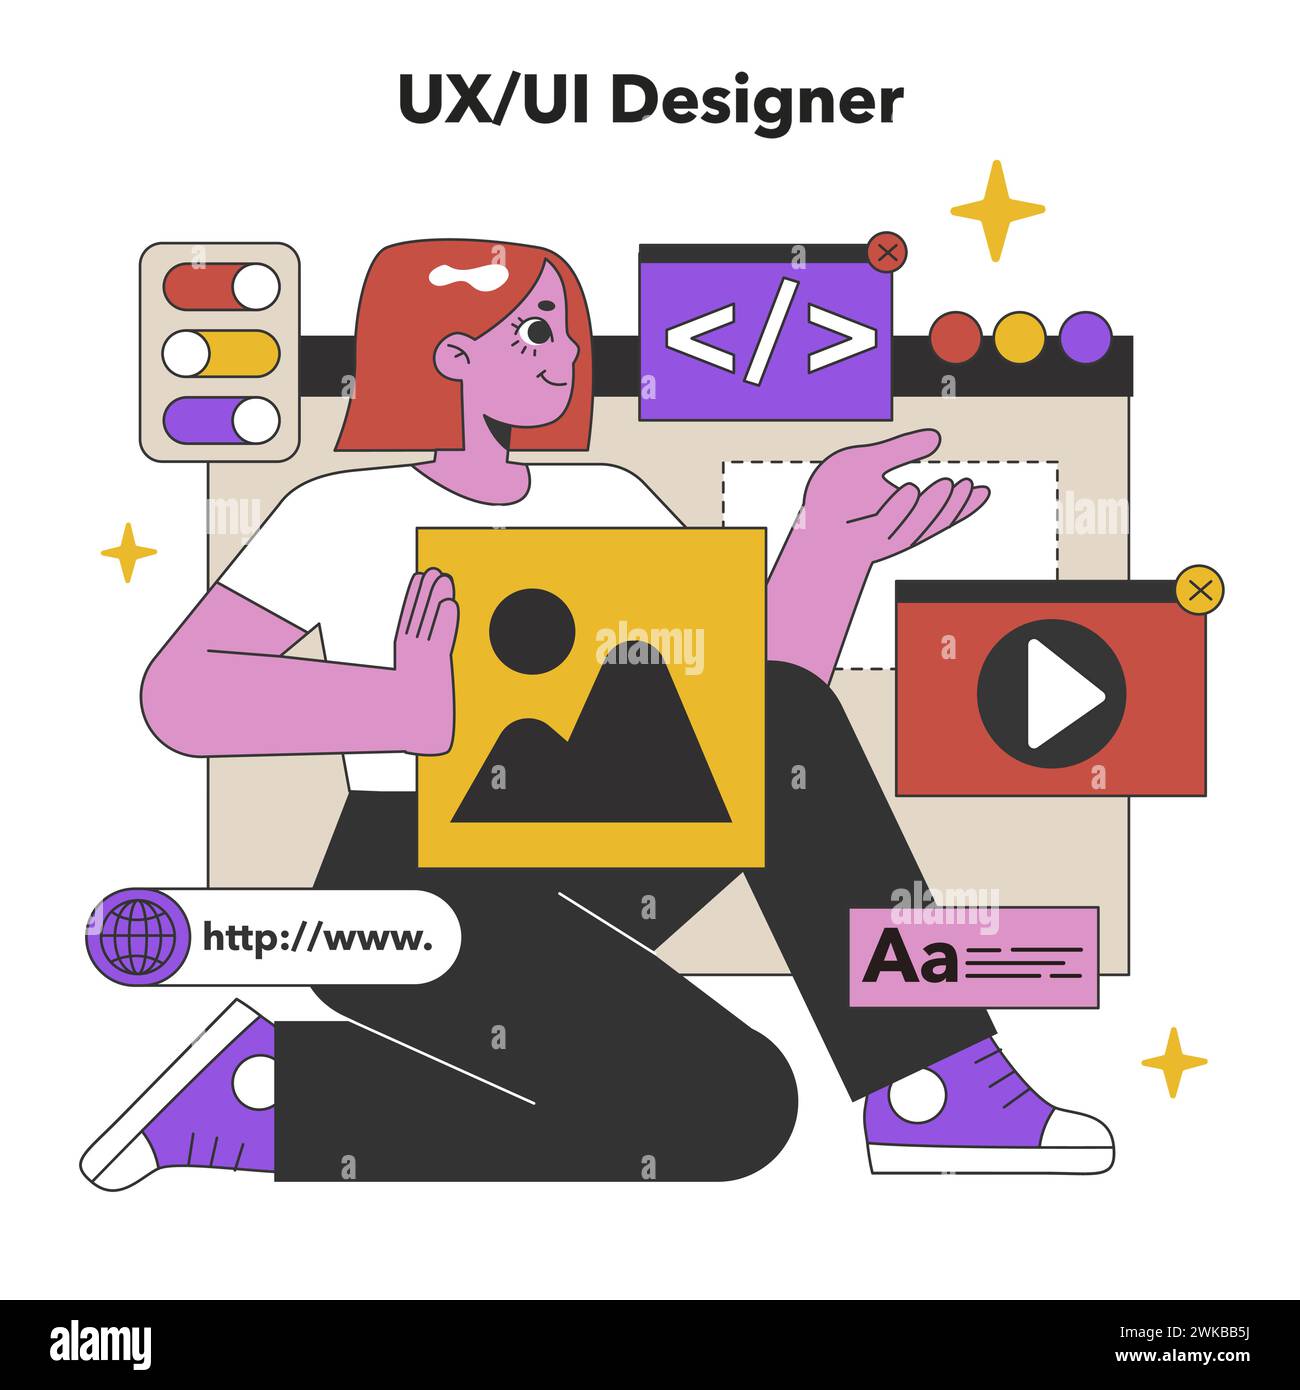 UX UI Designer at Work. A professional combines functionality with aesthetics, focusing on seamless user flow and engaging visuals in digital design. Flat vector illustration Stock Vector